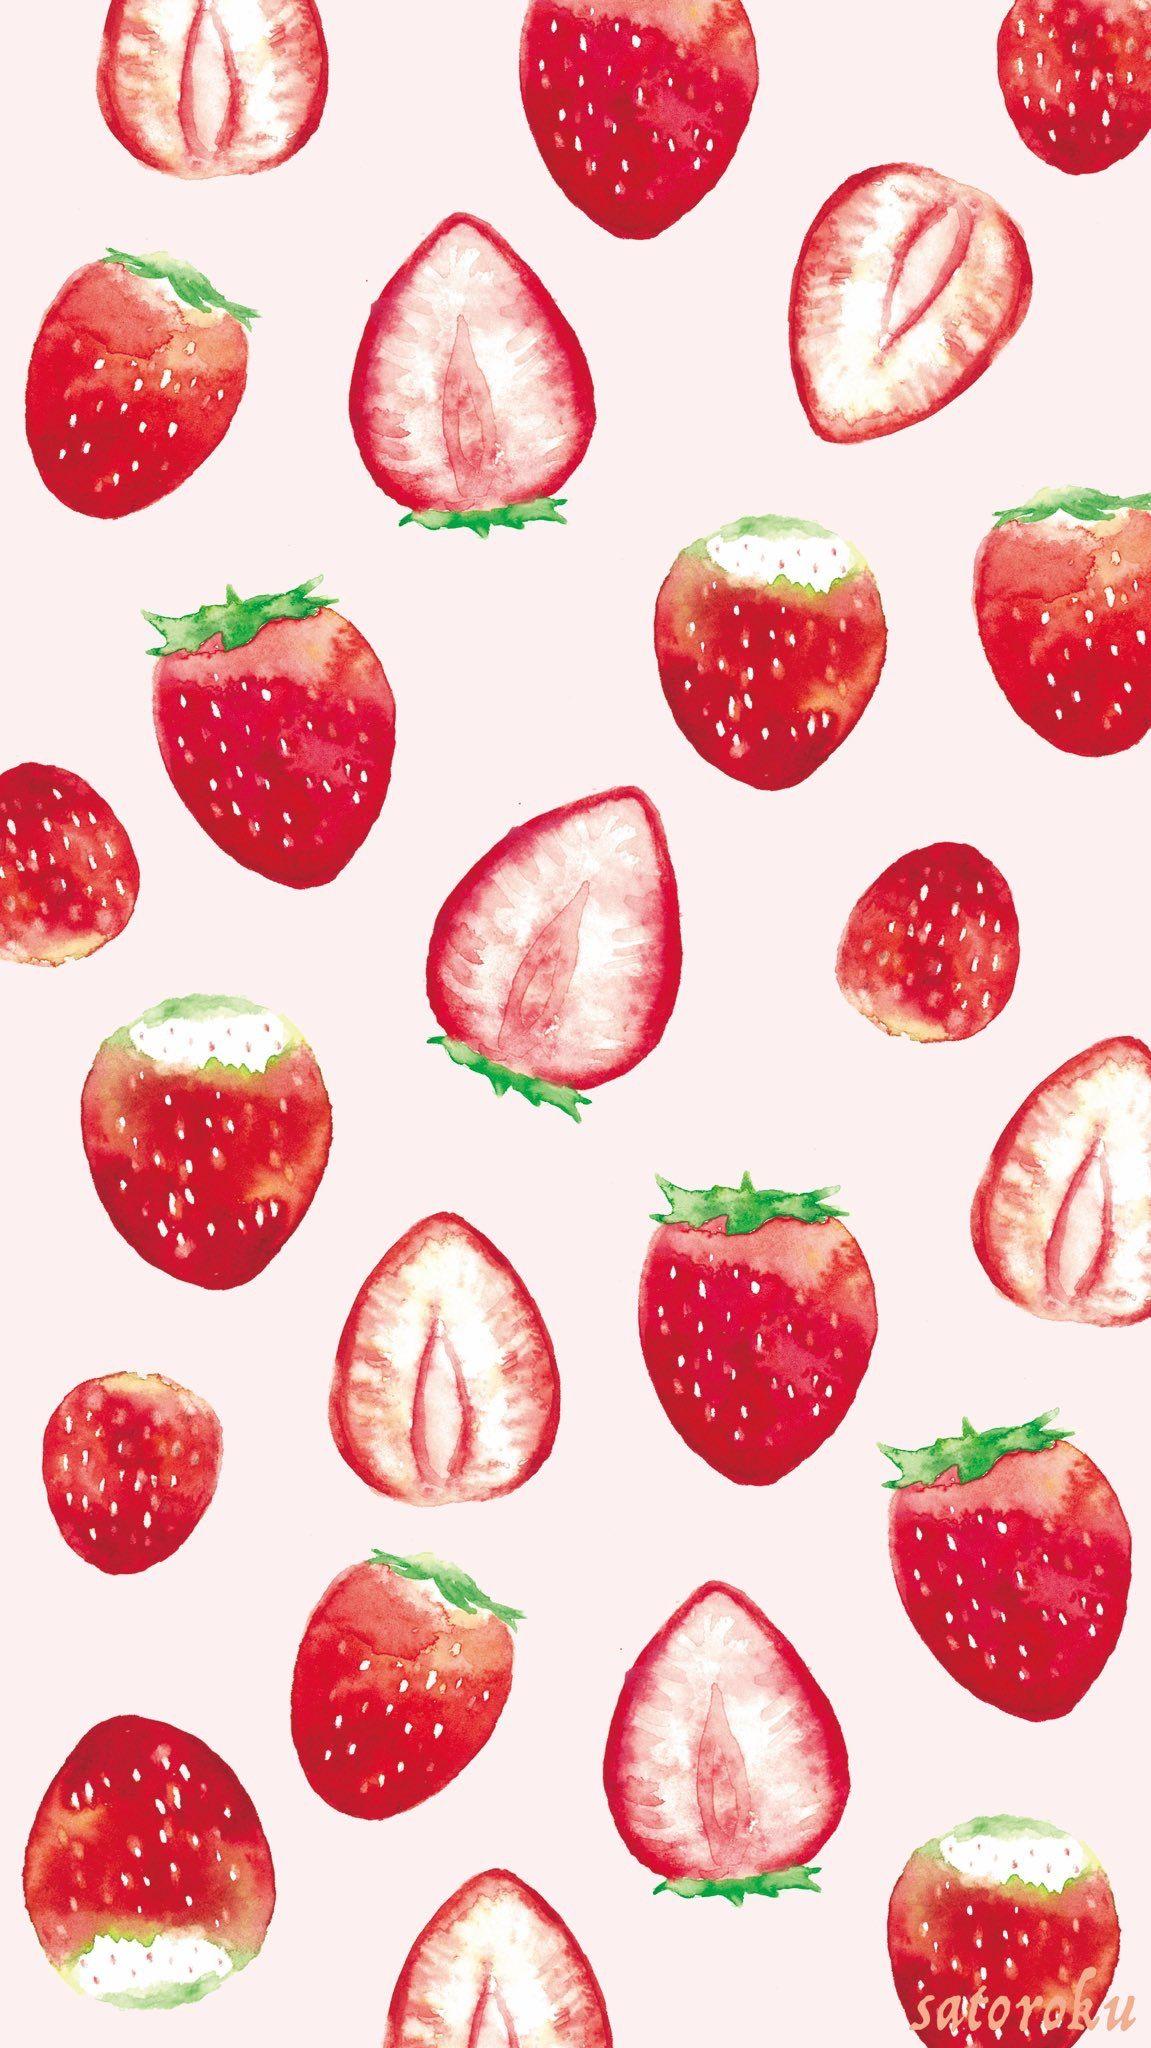 Funny Cute Cartoon Big And Little Berries Of Strawberry In The Chaotic  Order The Seamless Vector Background The Smiling And Laughing Kawaii  Emoji Strawberries The Wallpaper For Kids With The Red Fruits